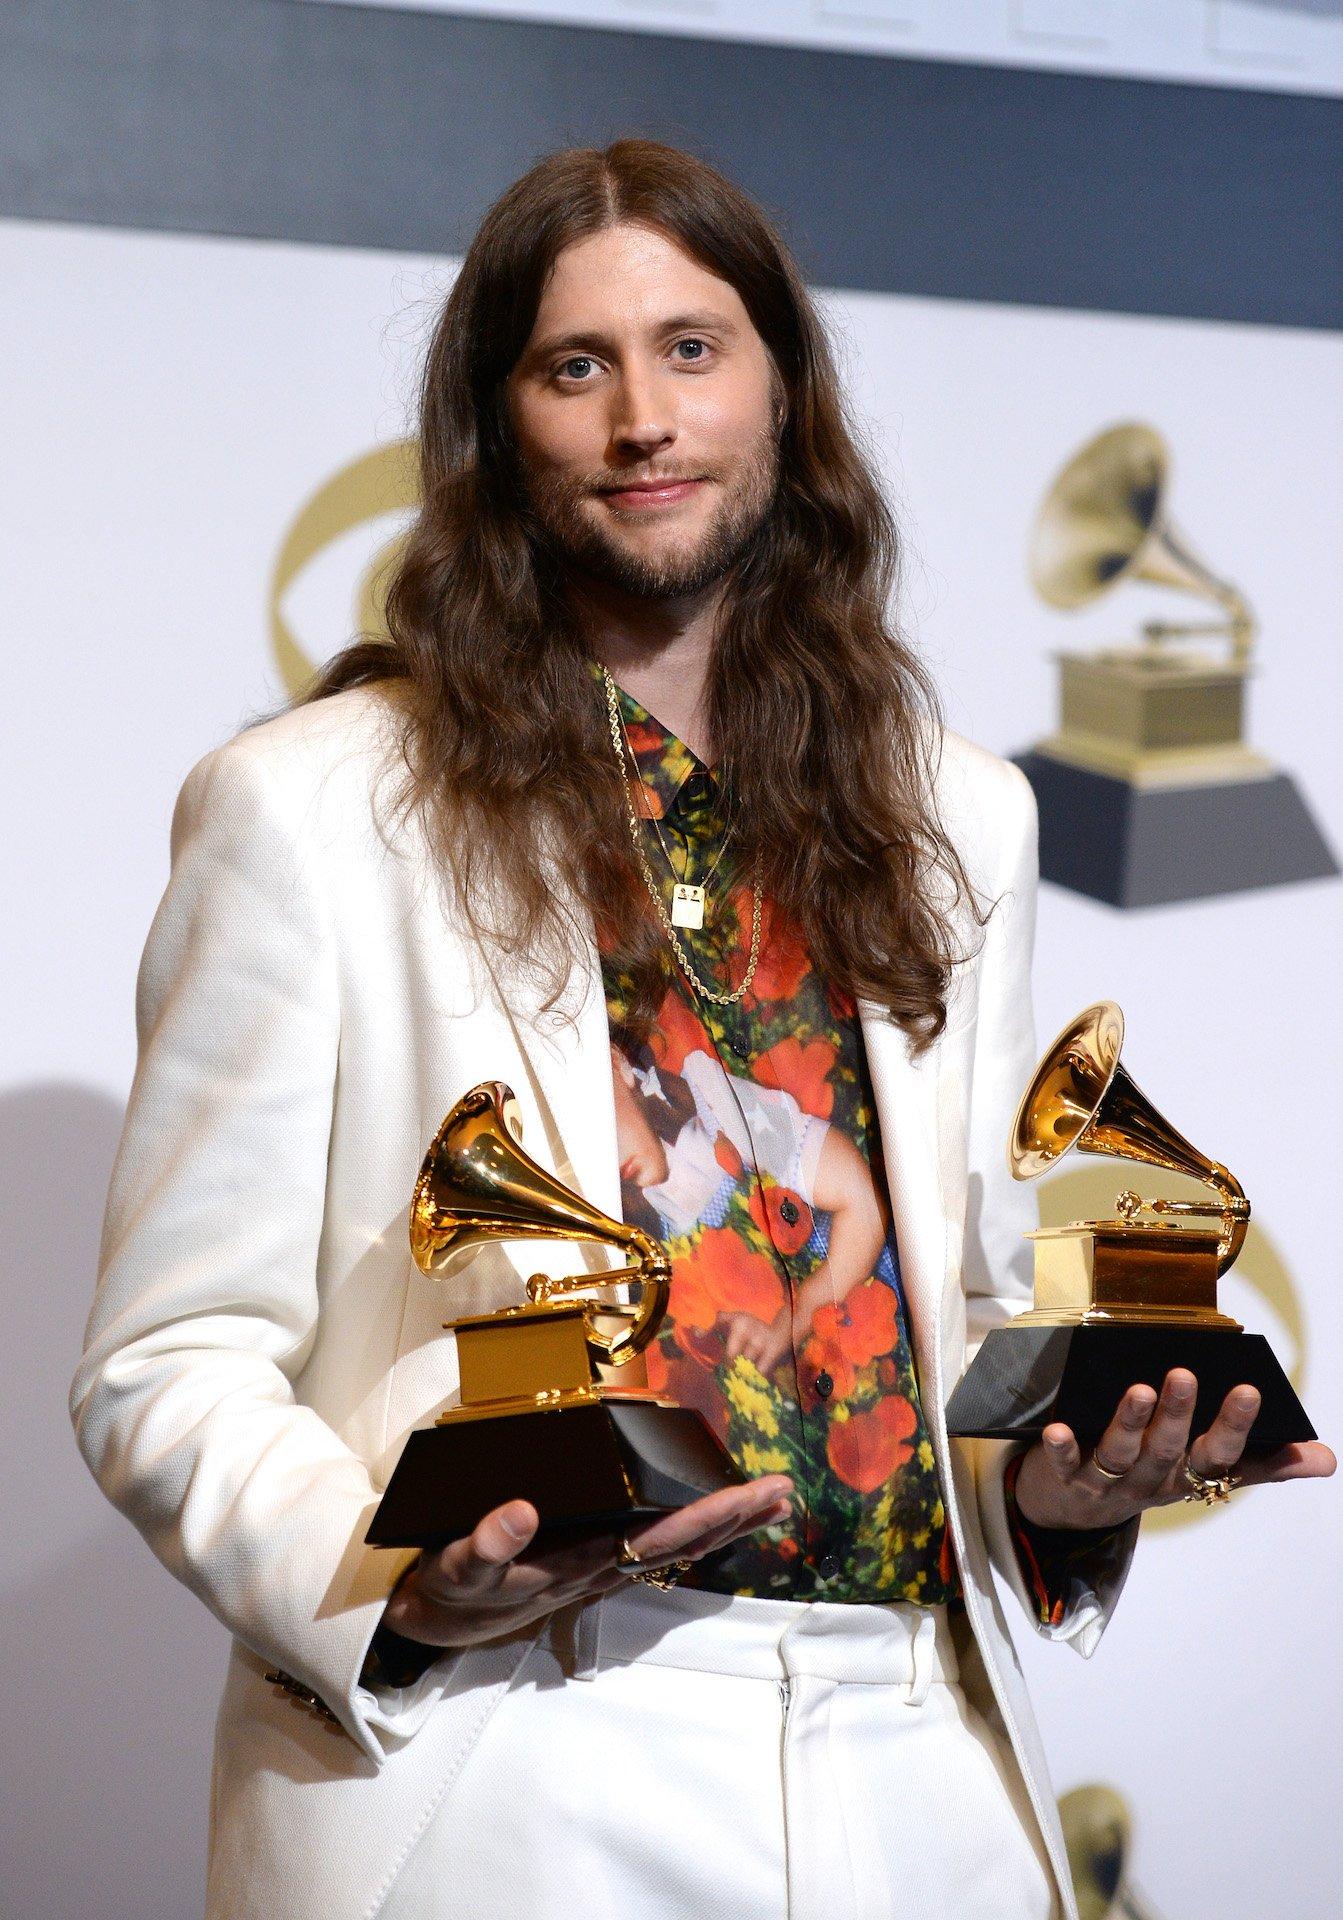 Photo of GRAMMY statues at the 61st GRAMMY Awards in 2019